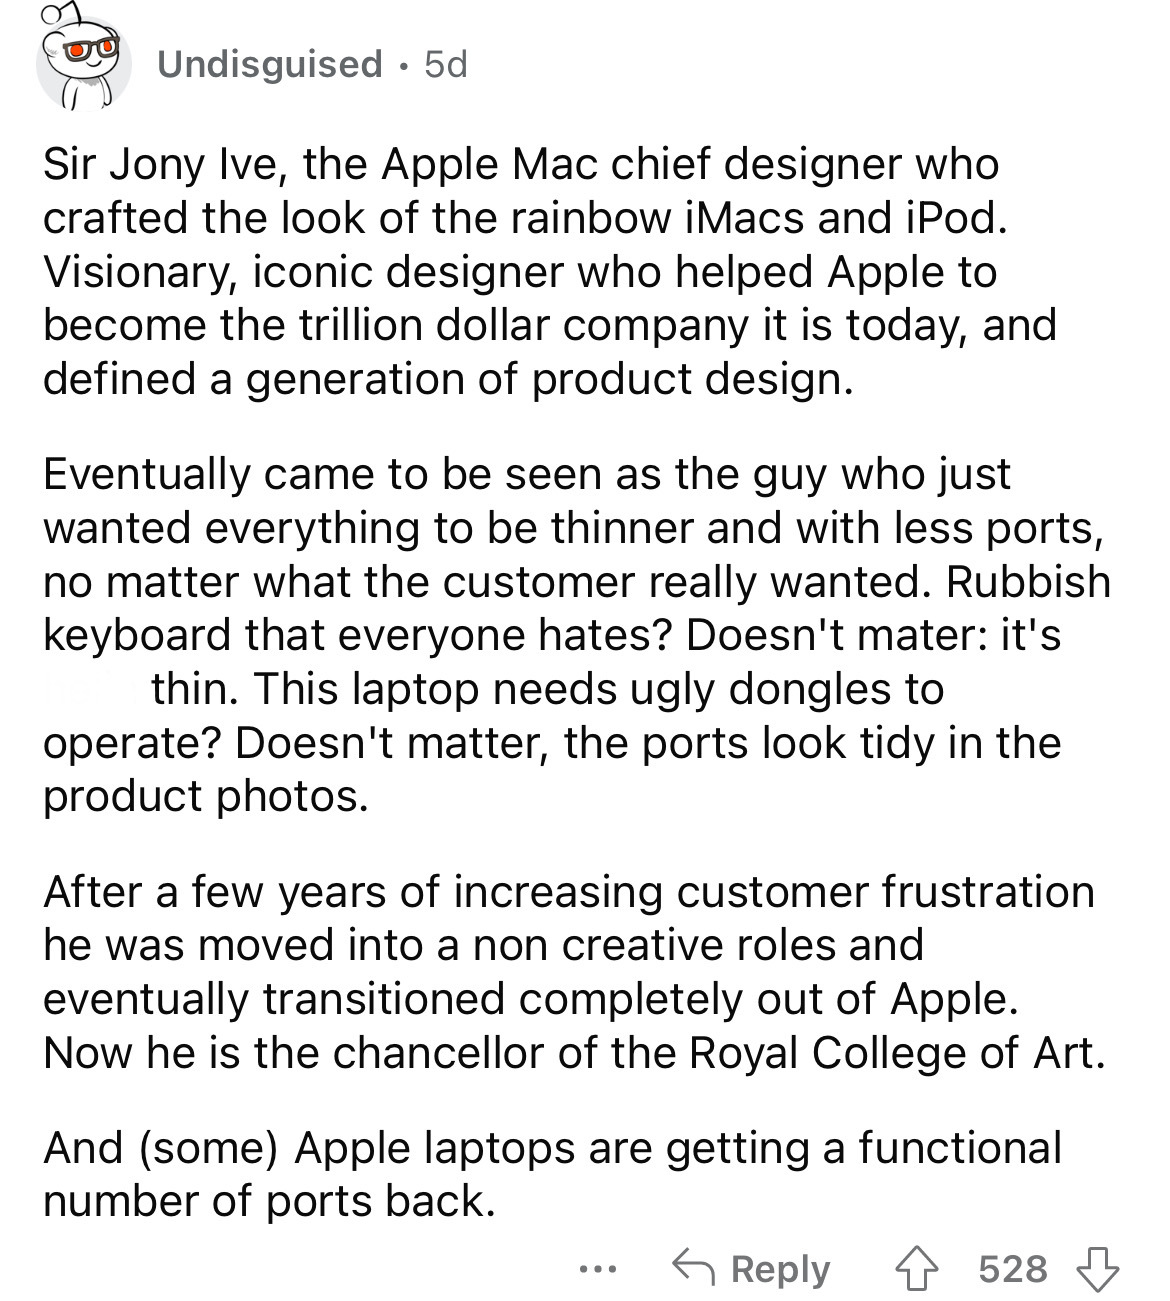 document - Undisguised 5d Sir Jony Ive, the Apple Mac chief designer who crafted the look of the rainbow iMacs and iPod. Visionary, iconic designer who helped Apple to become the trillion dollar company it is today, and defined a generation of product des